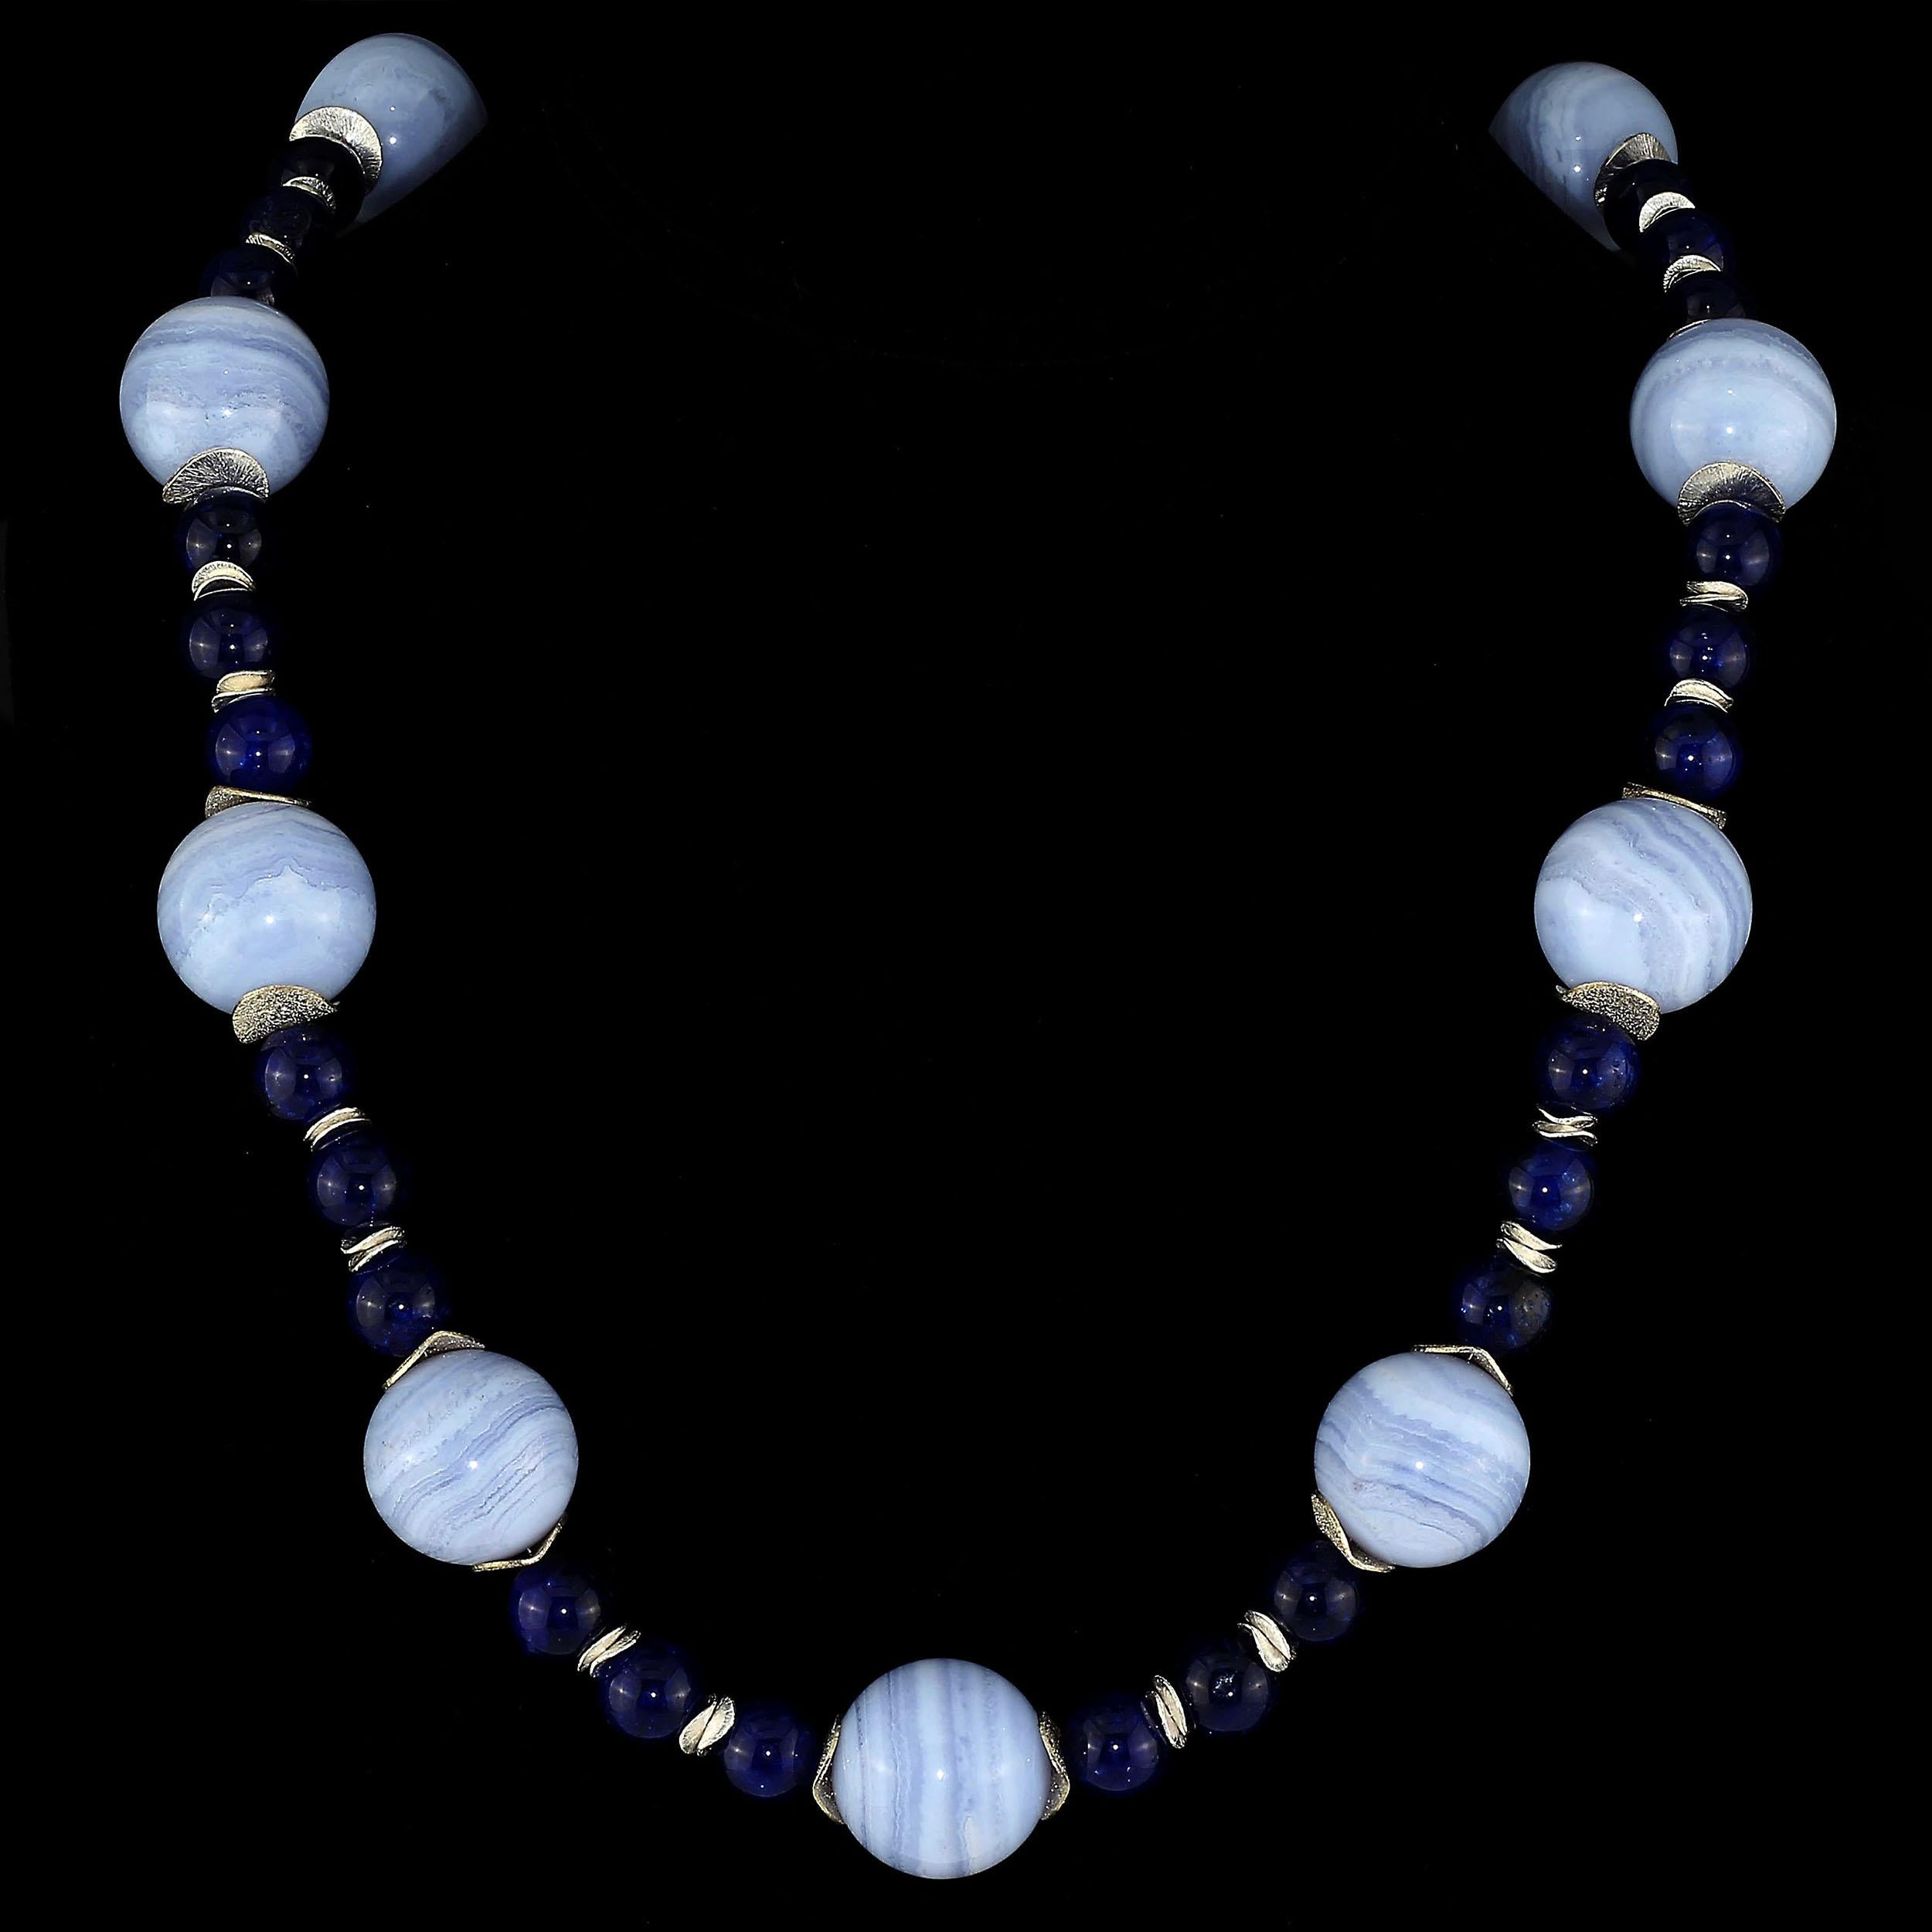 Bead Gemjunky Hot Topic Necklace of Blue Lace Agate and Blue Agate